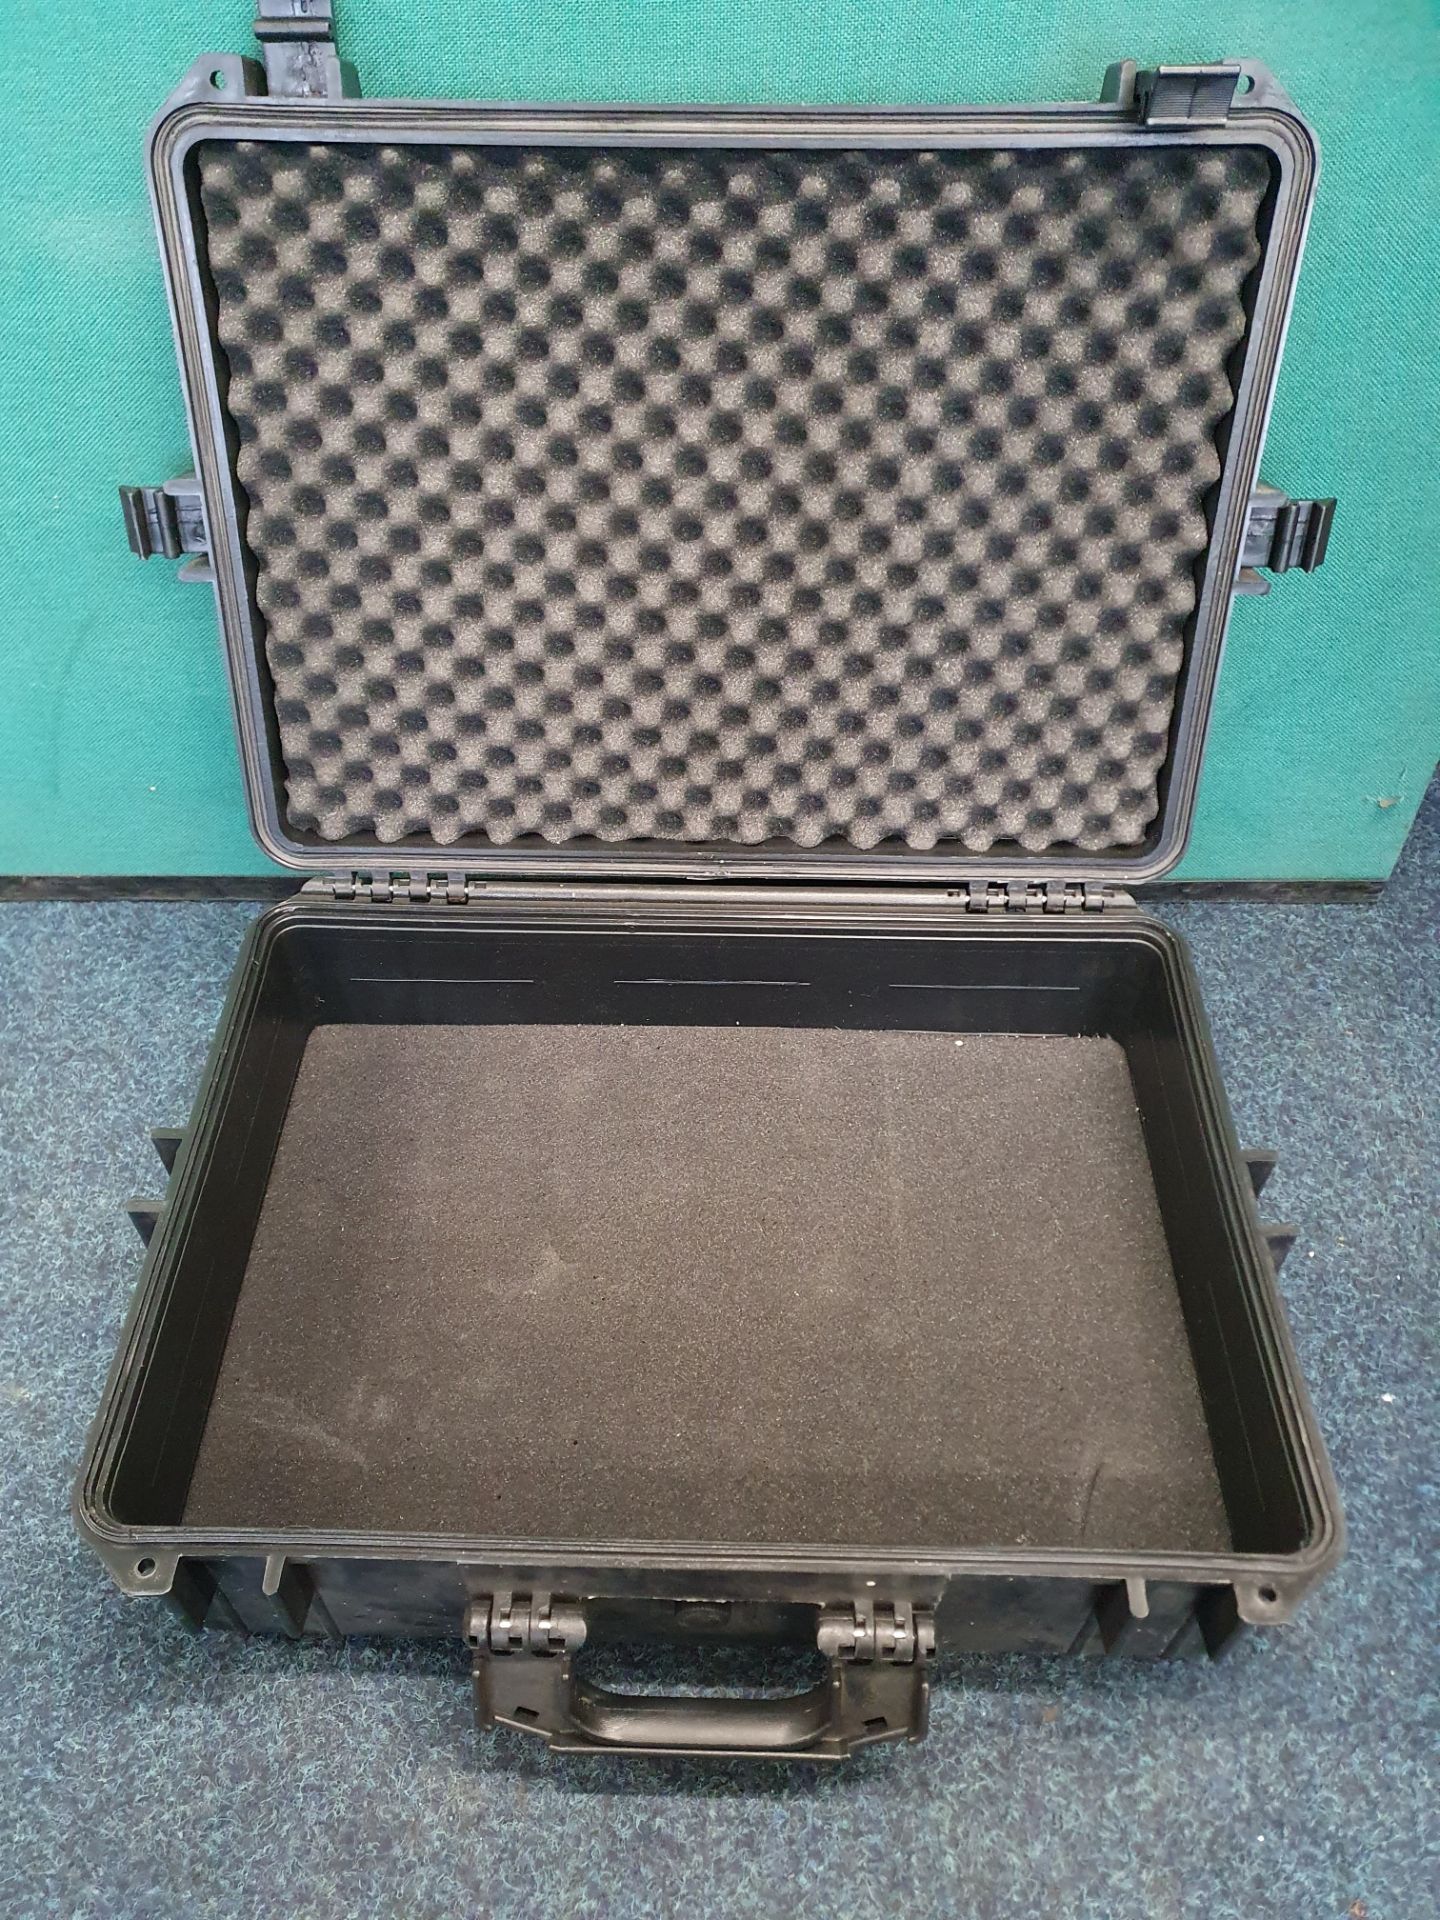 3 x Secure Carry Cases - Image 2 of 7